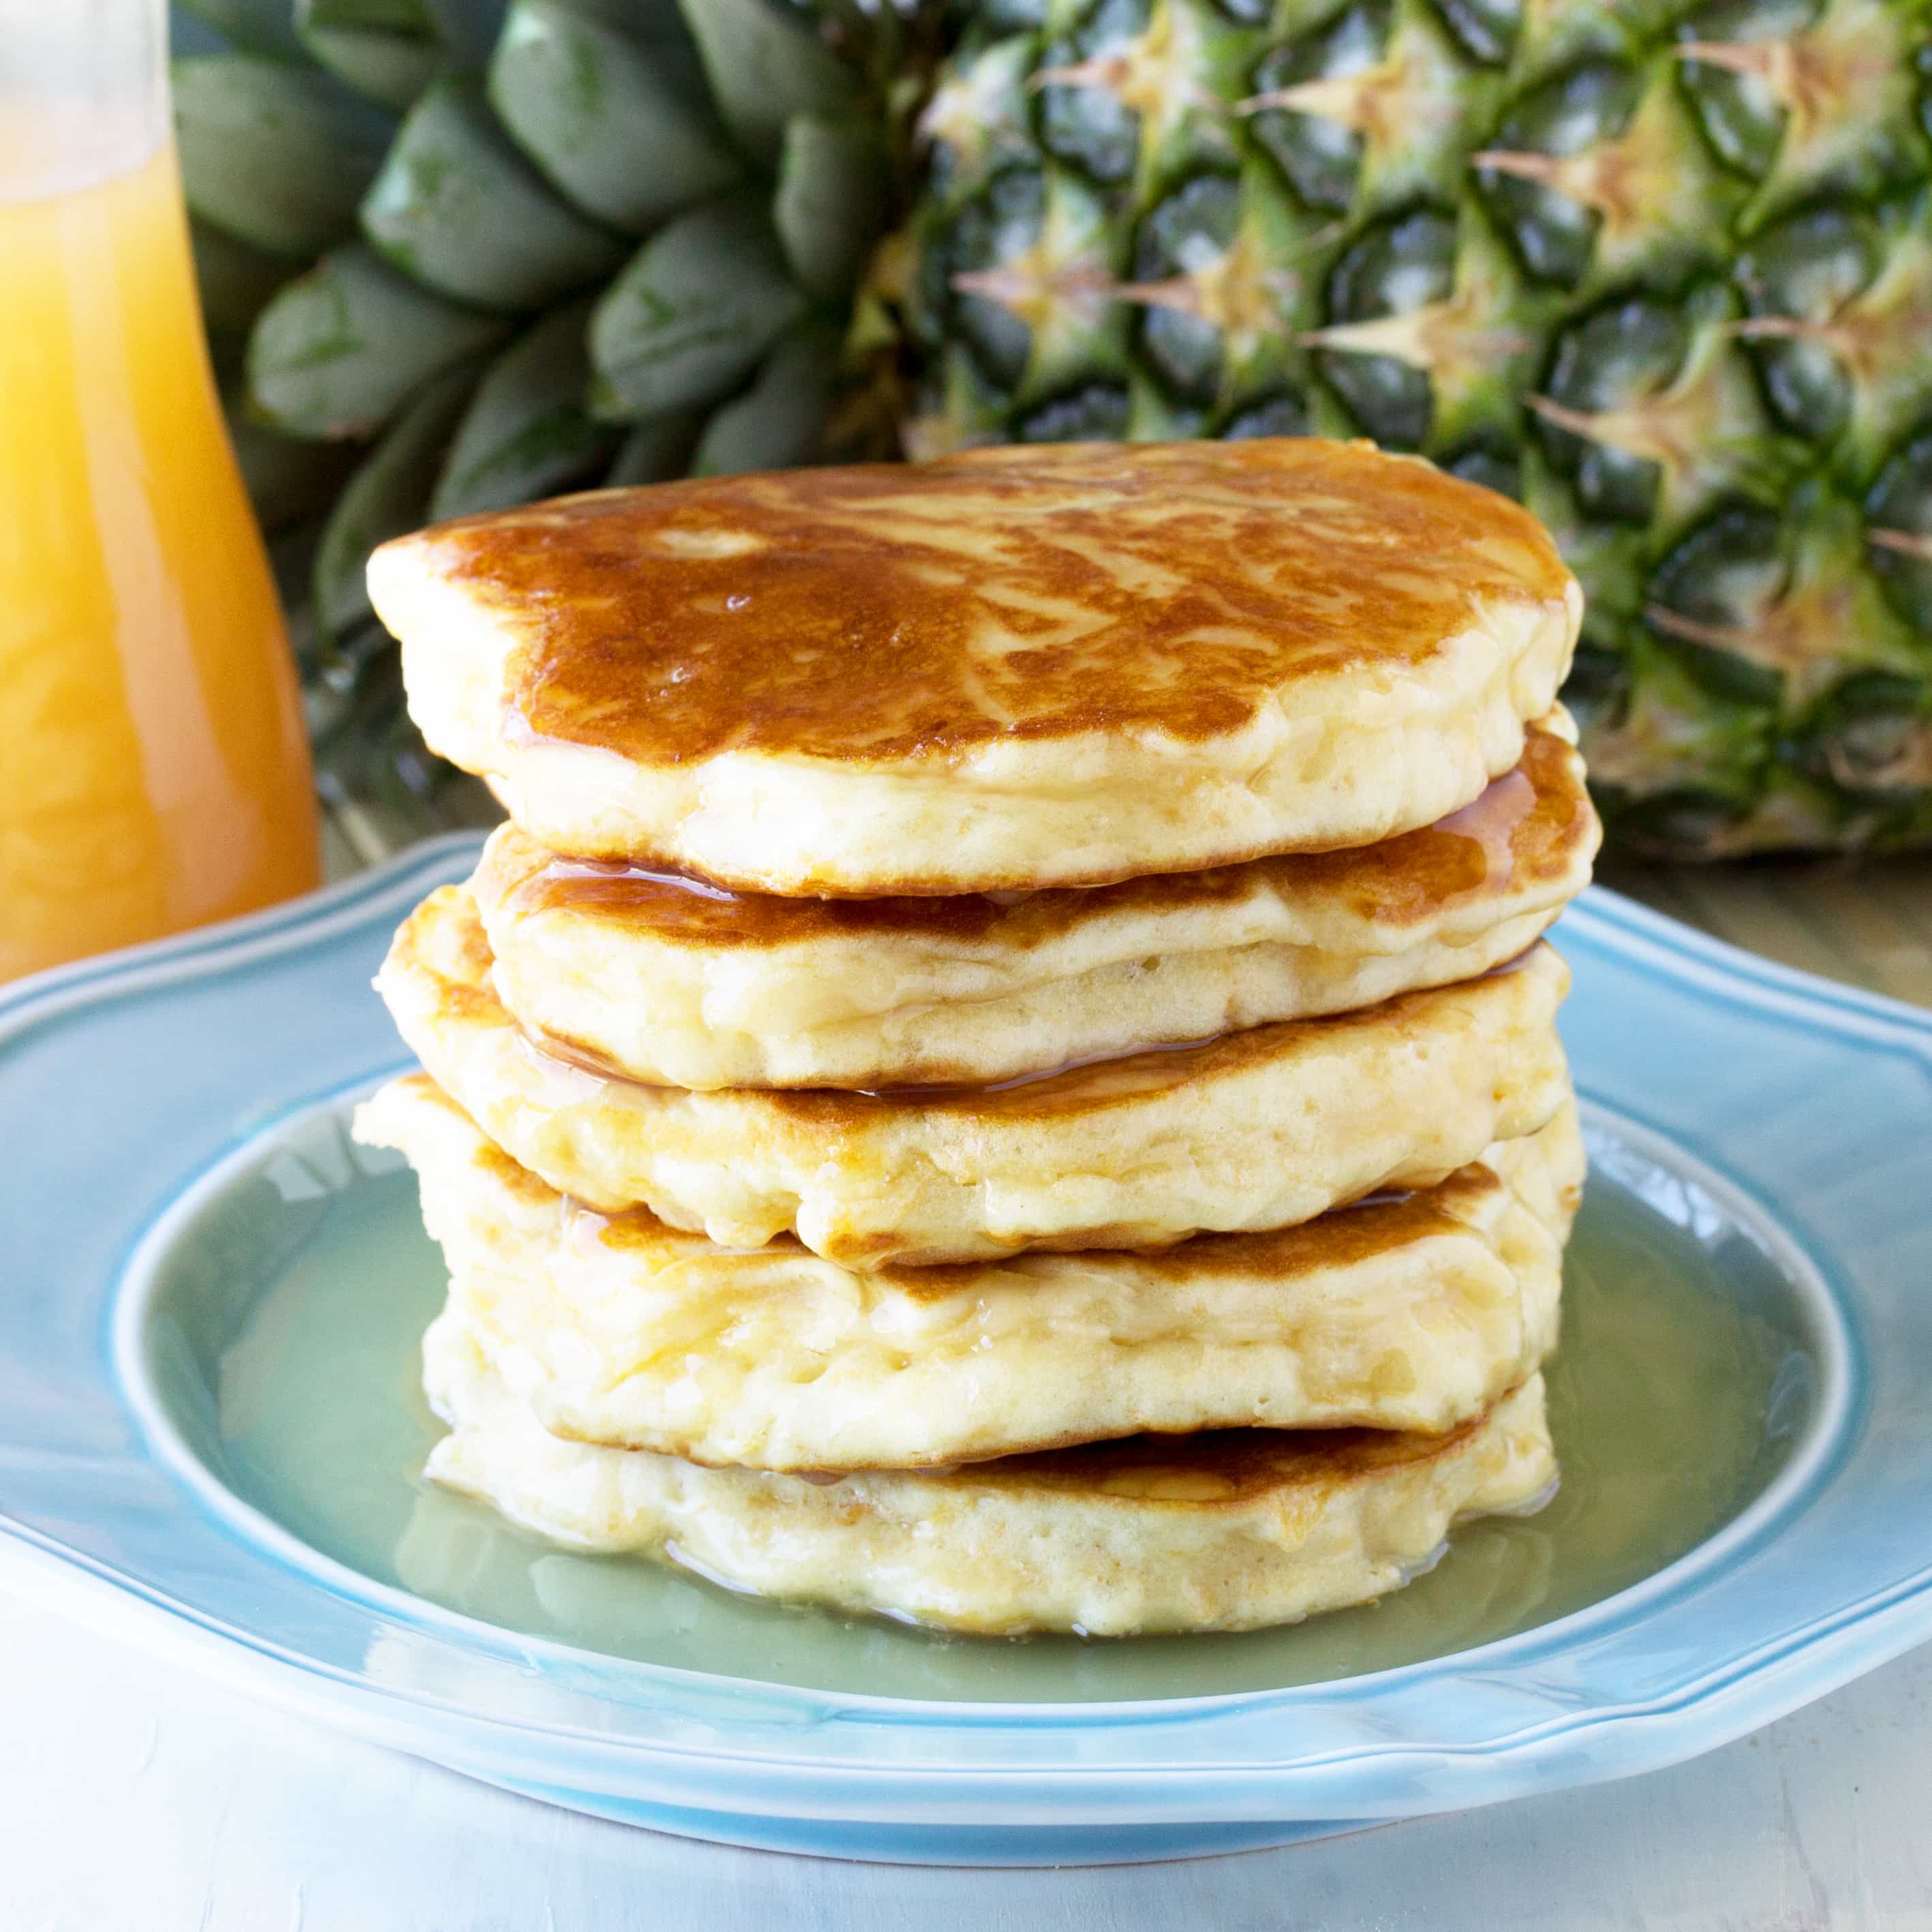 Pineapple Pancakes with Coconut Syrup over them on a blue plate.